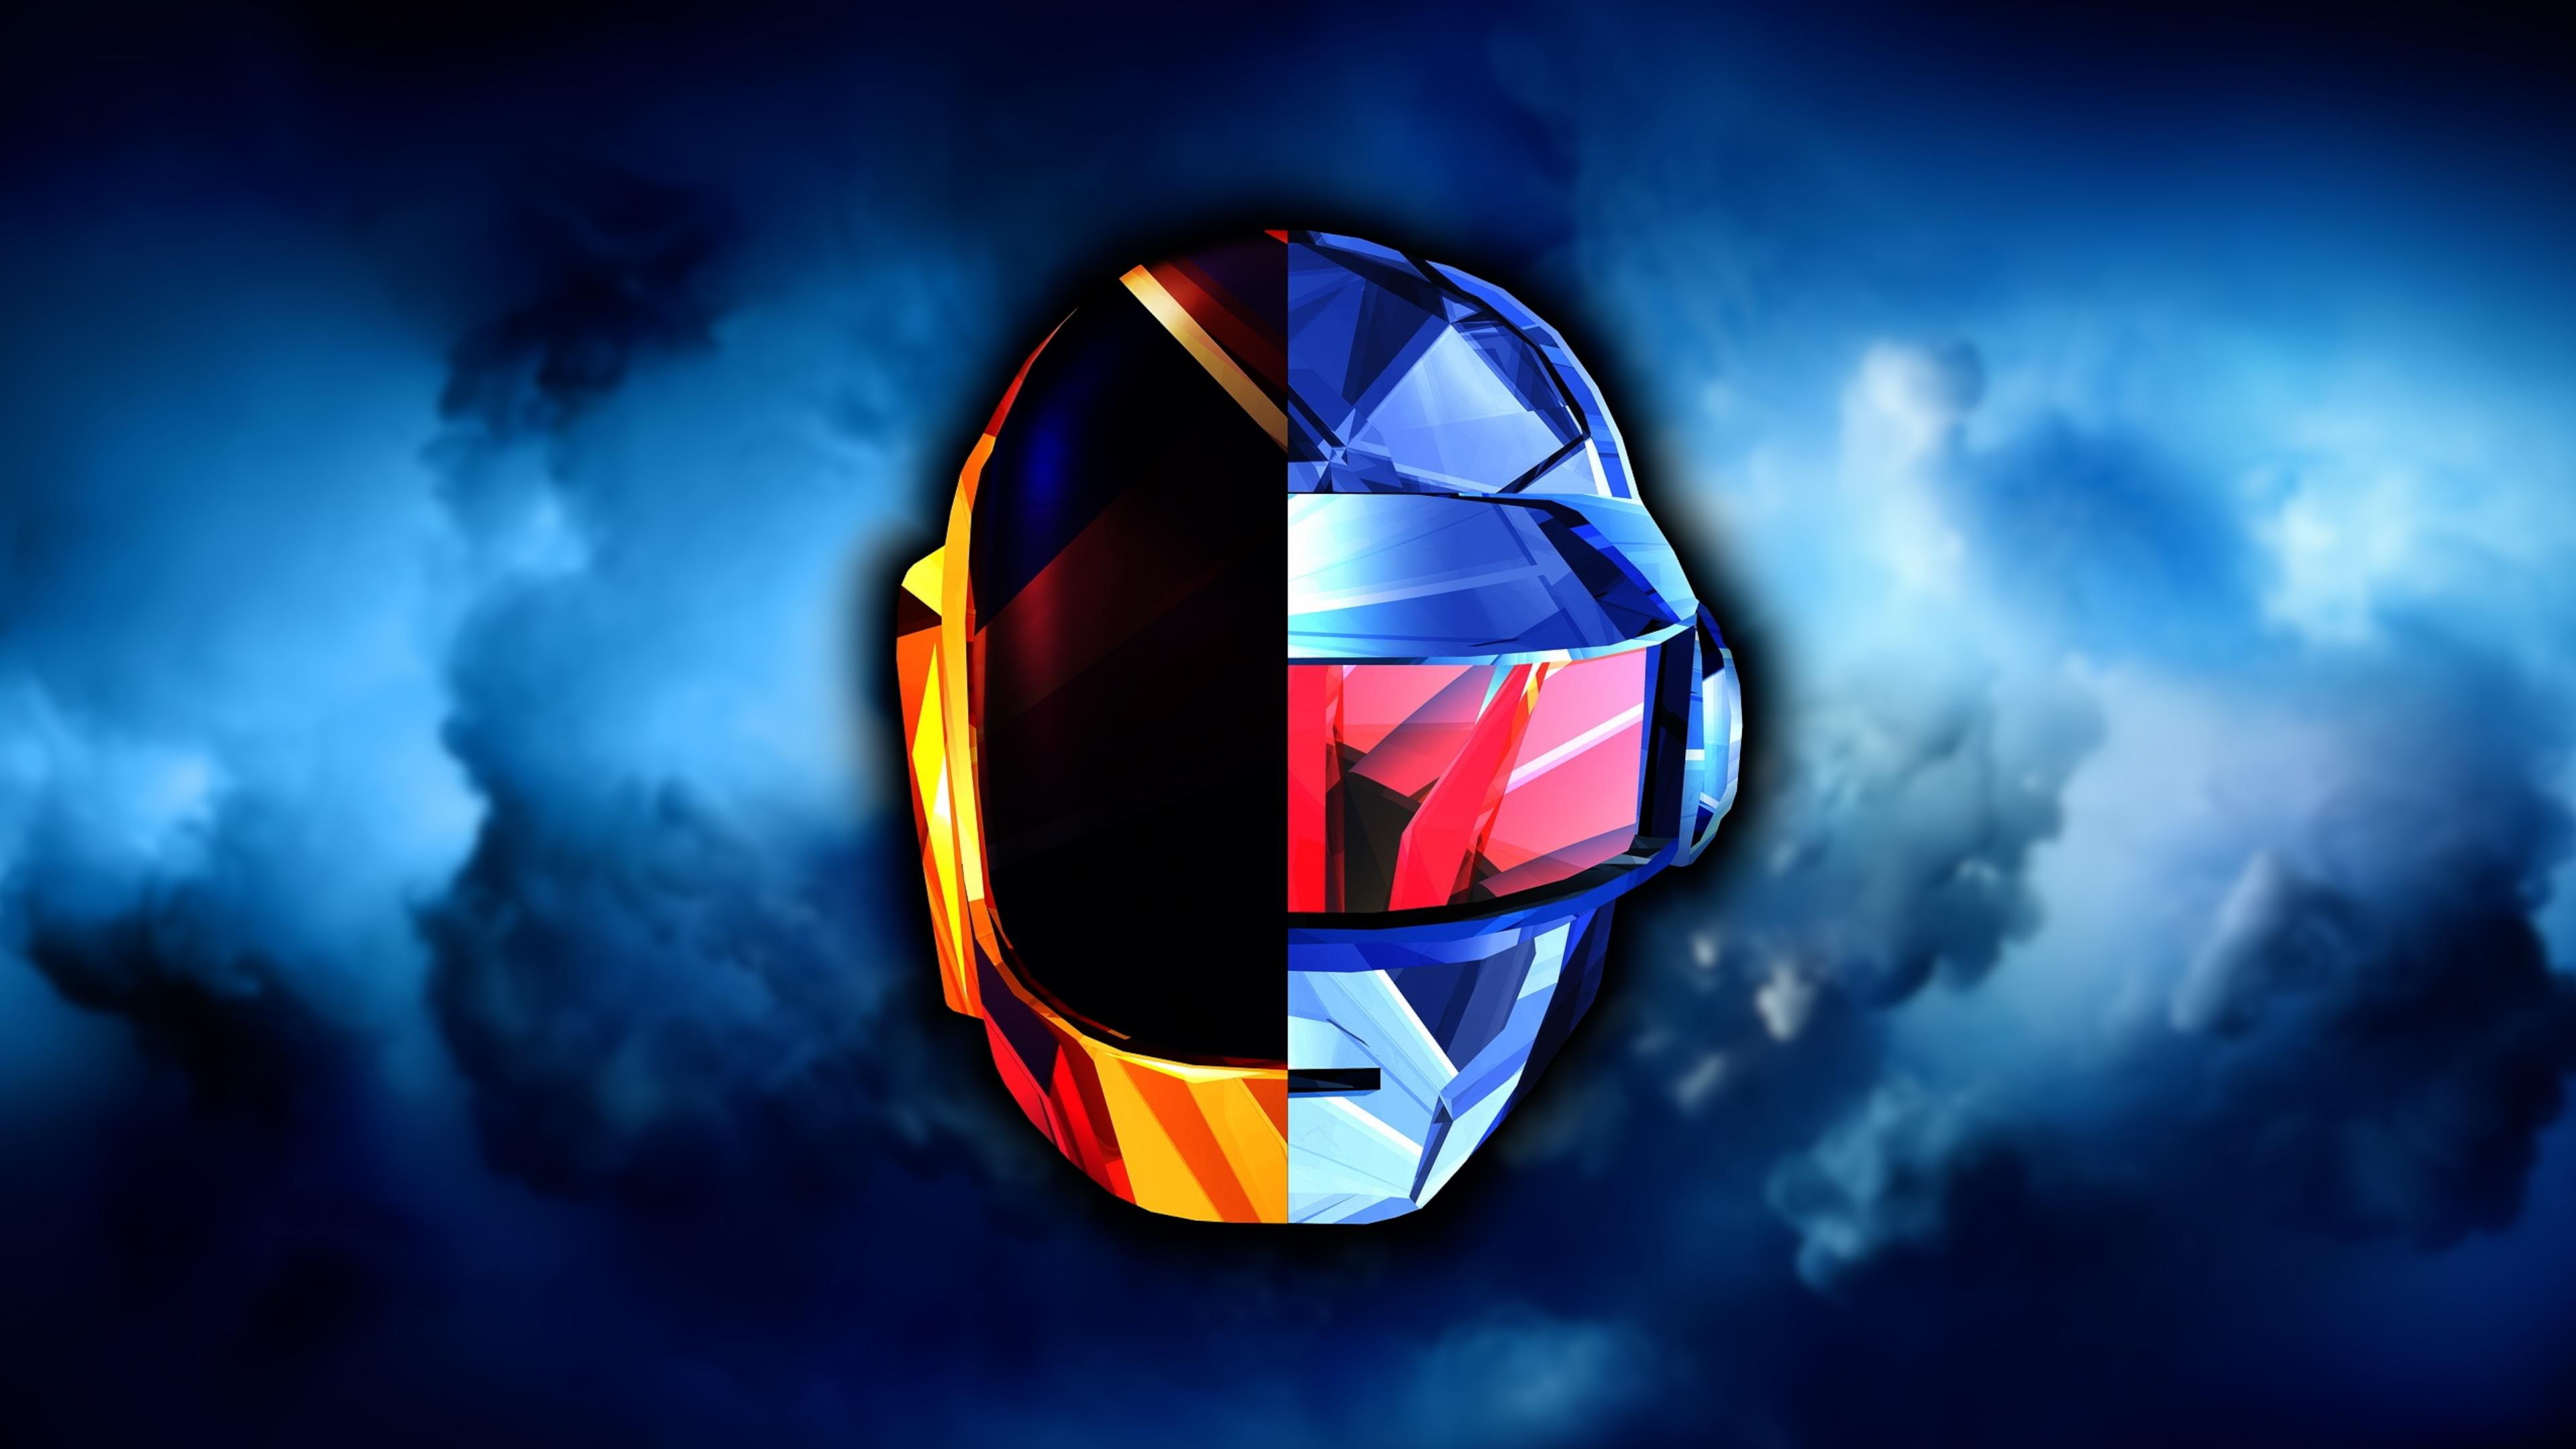 Low Poly Daft Punk Wallpapers